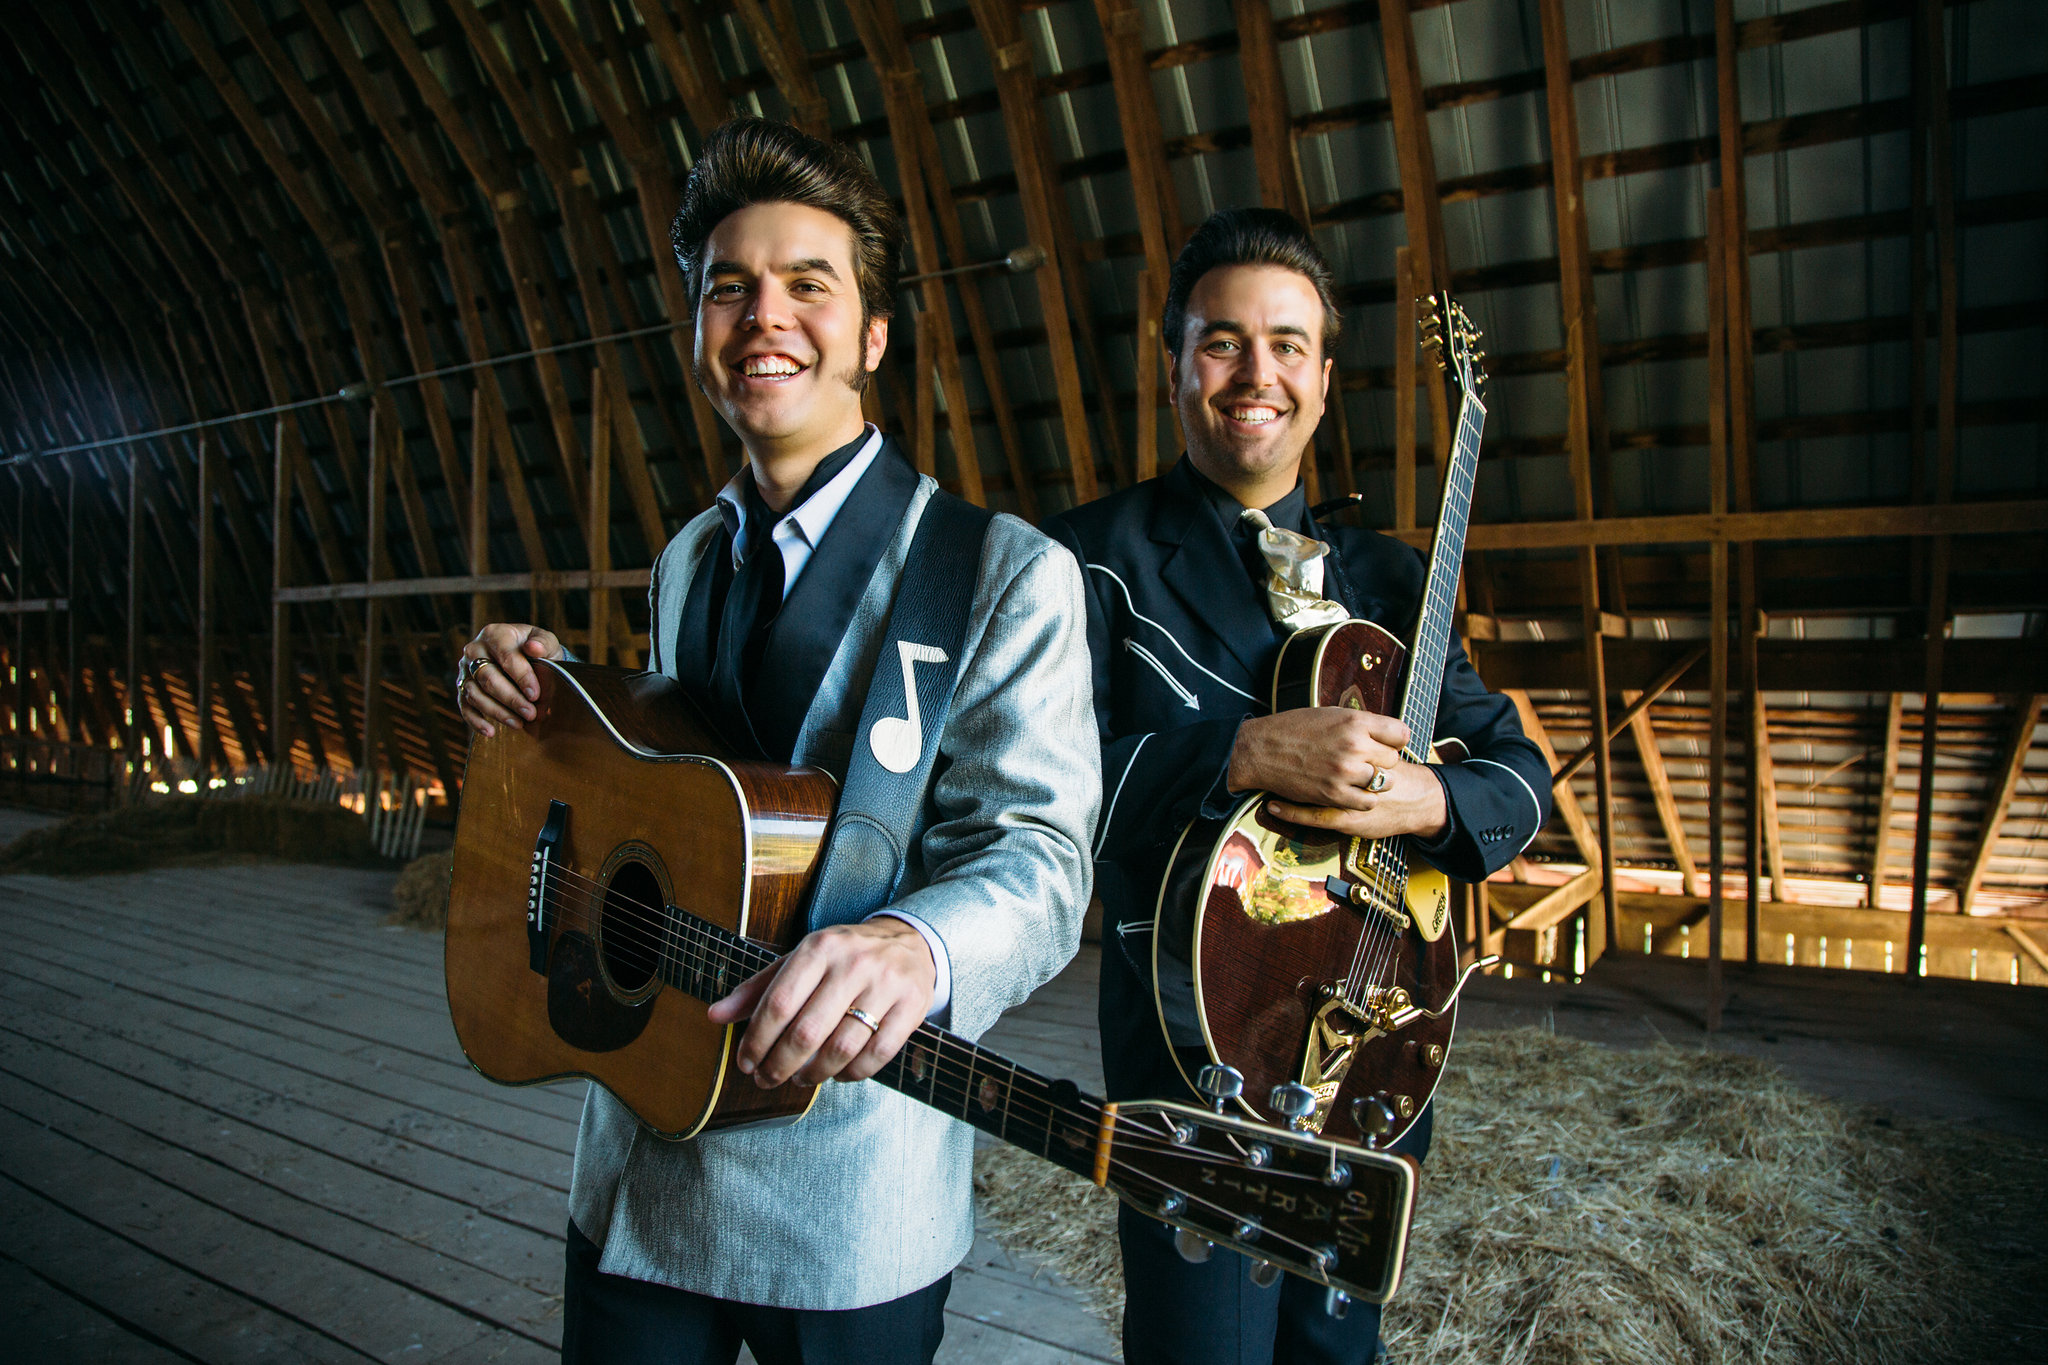 Malpass Brothers hold instruments in a barn loft